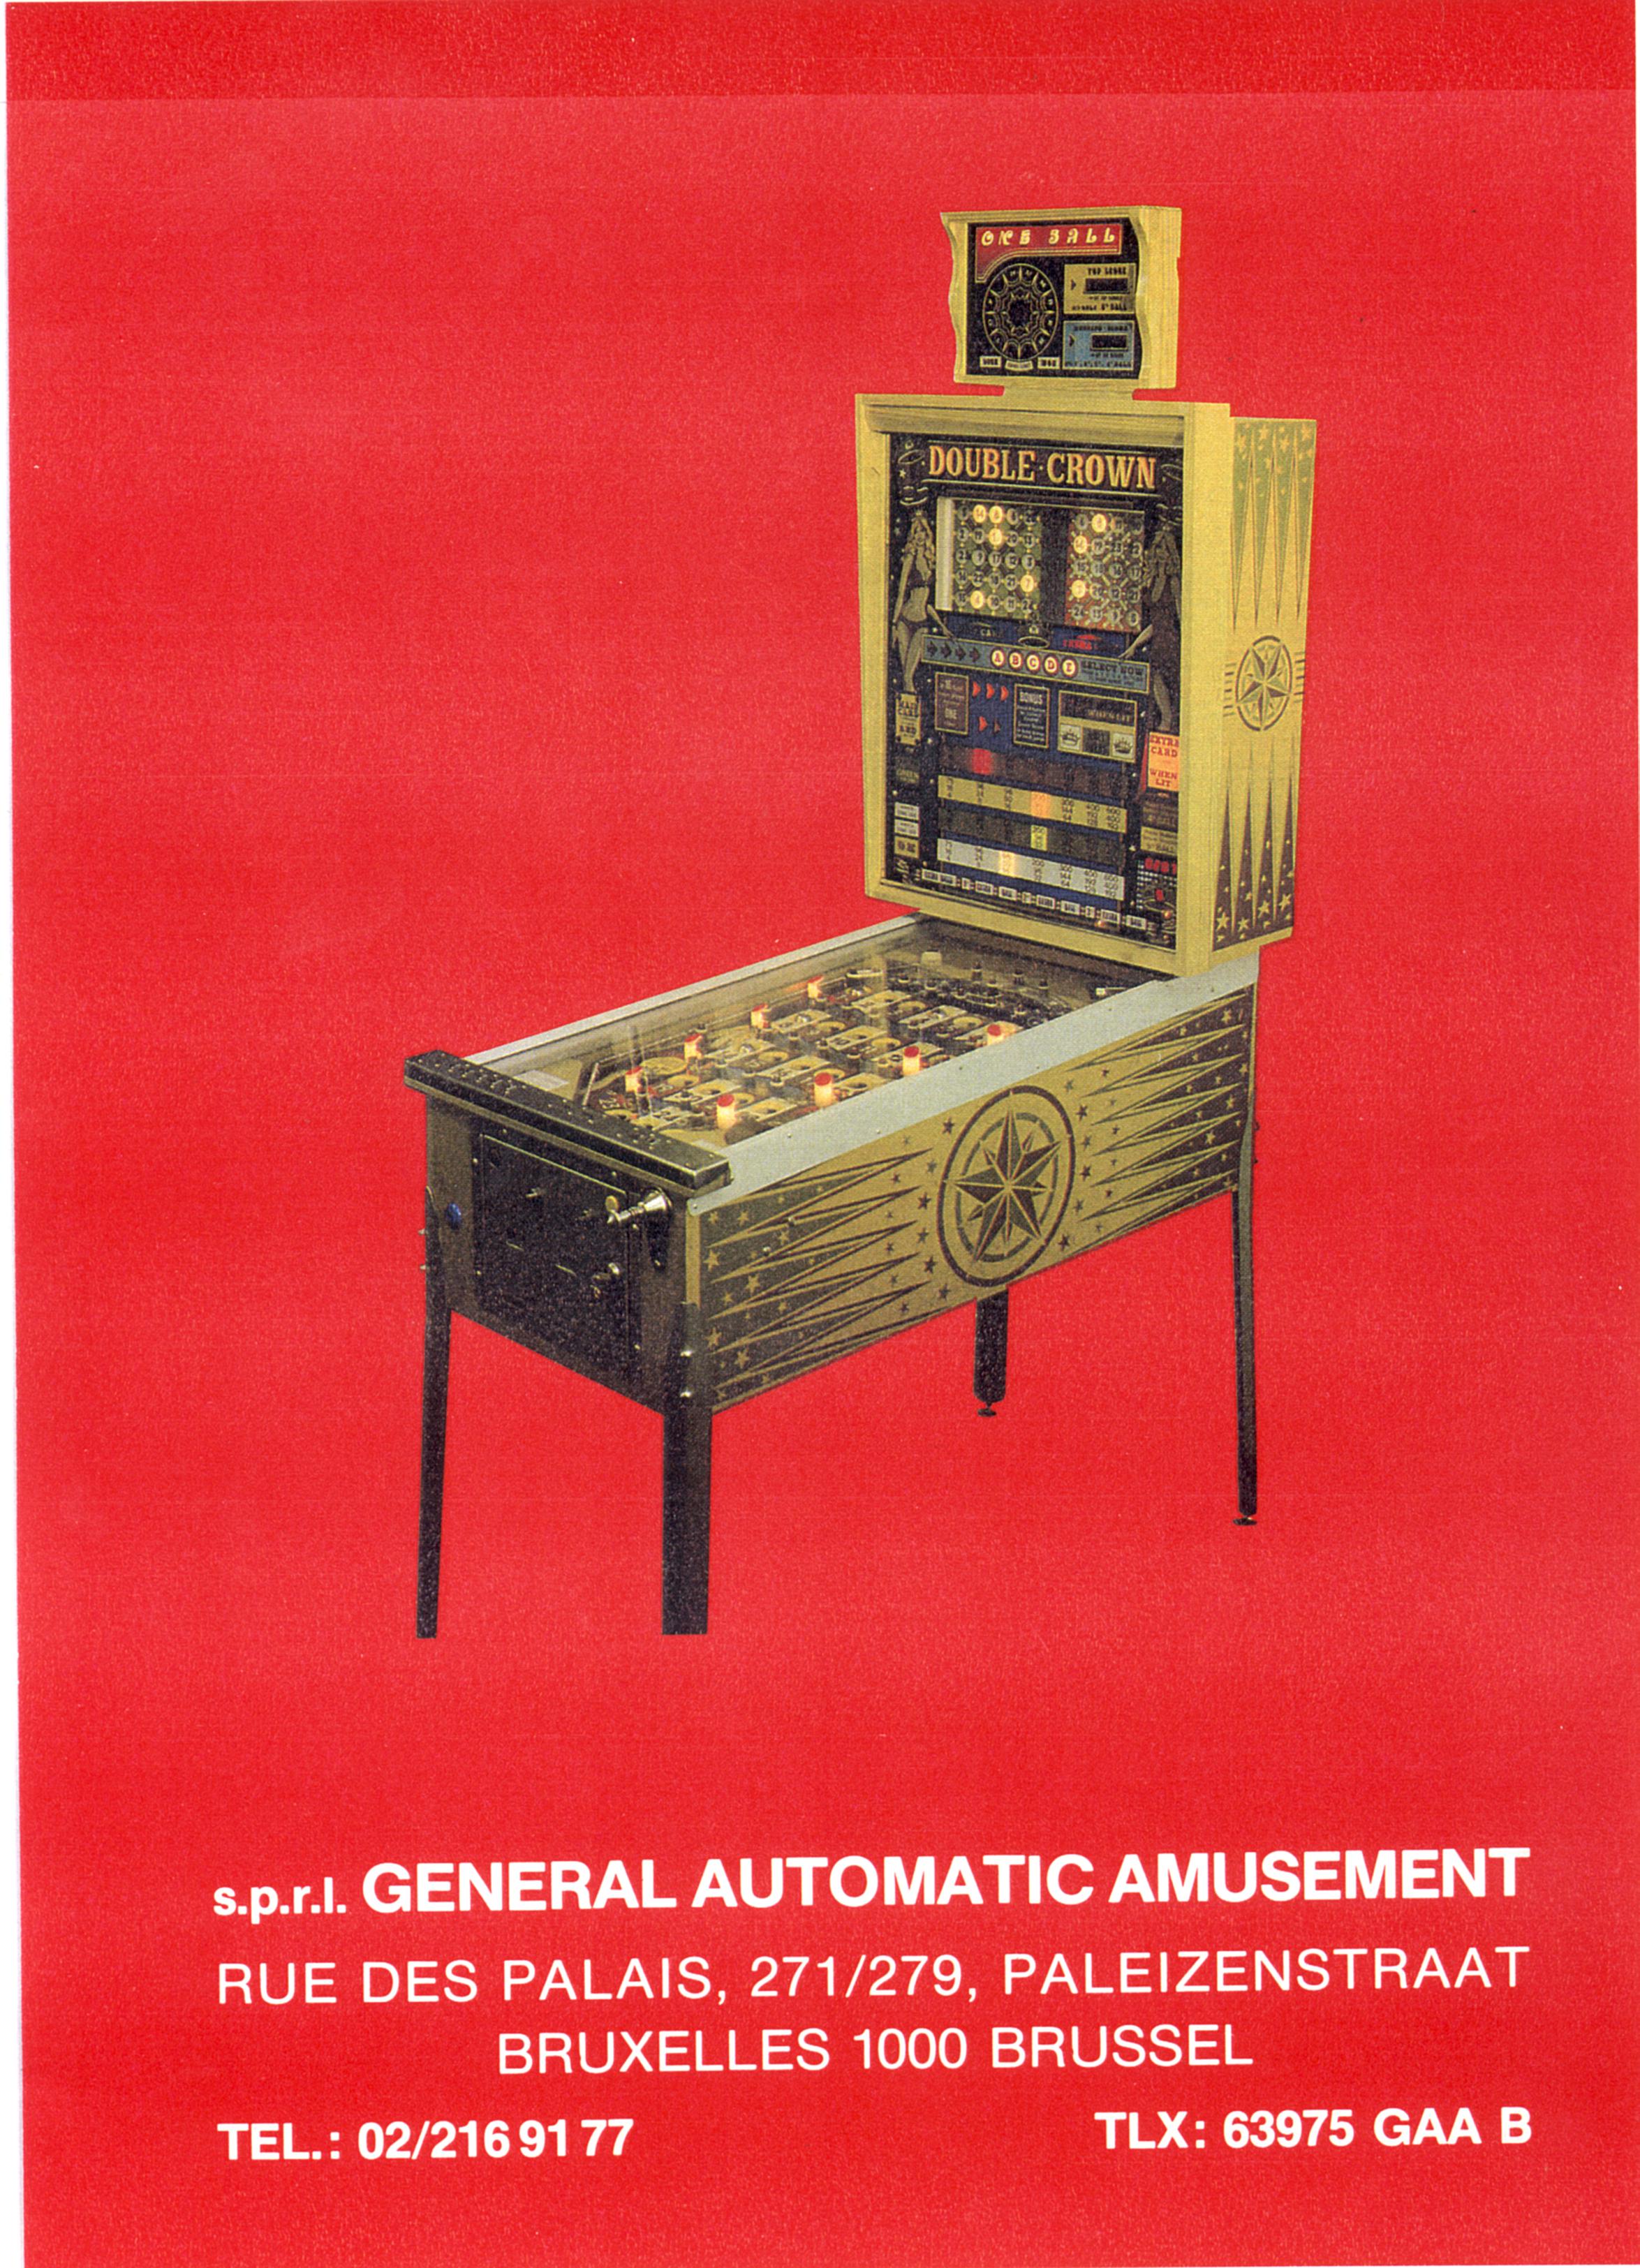 General Automated Amusements : Double Crown flyer